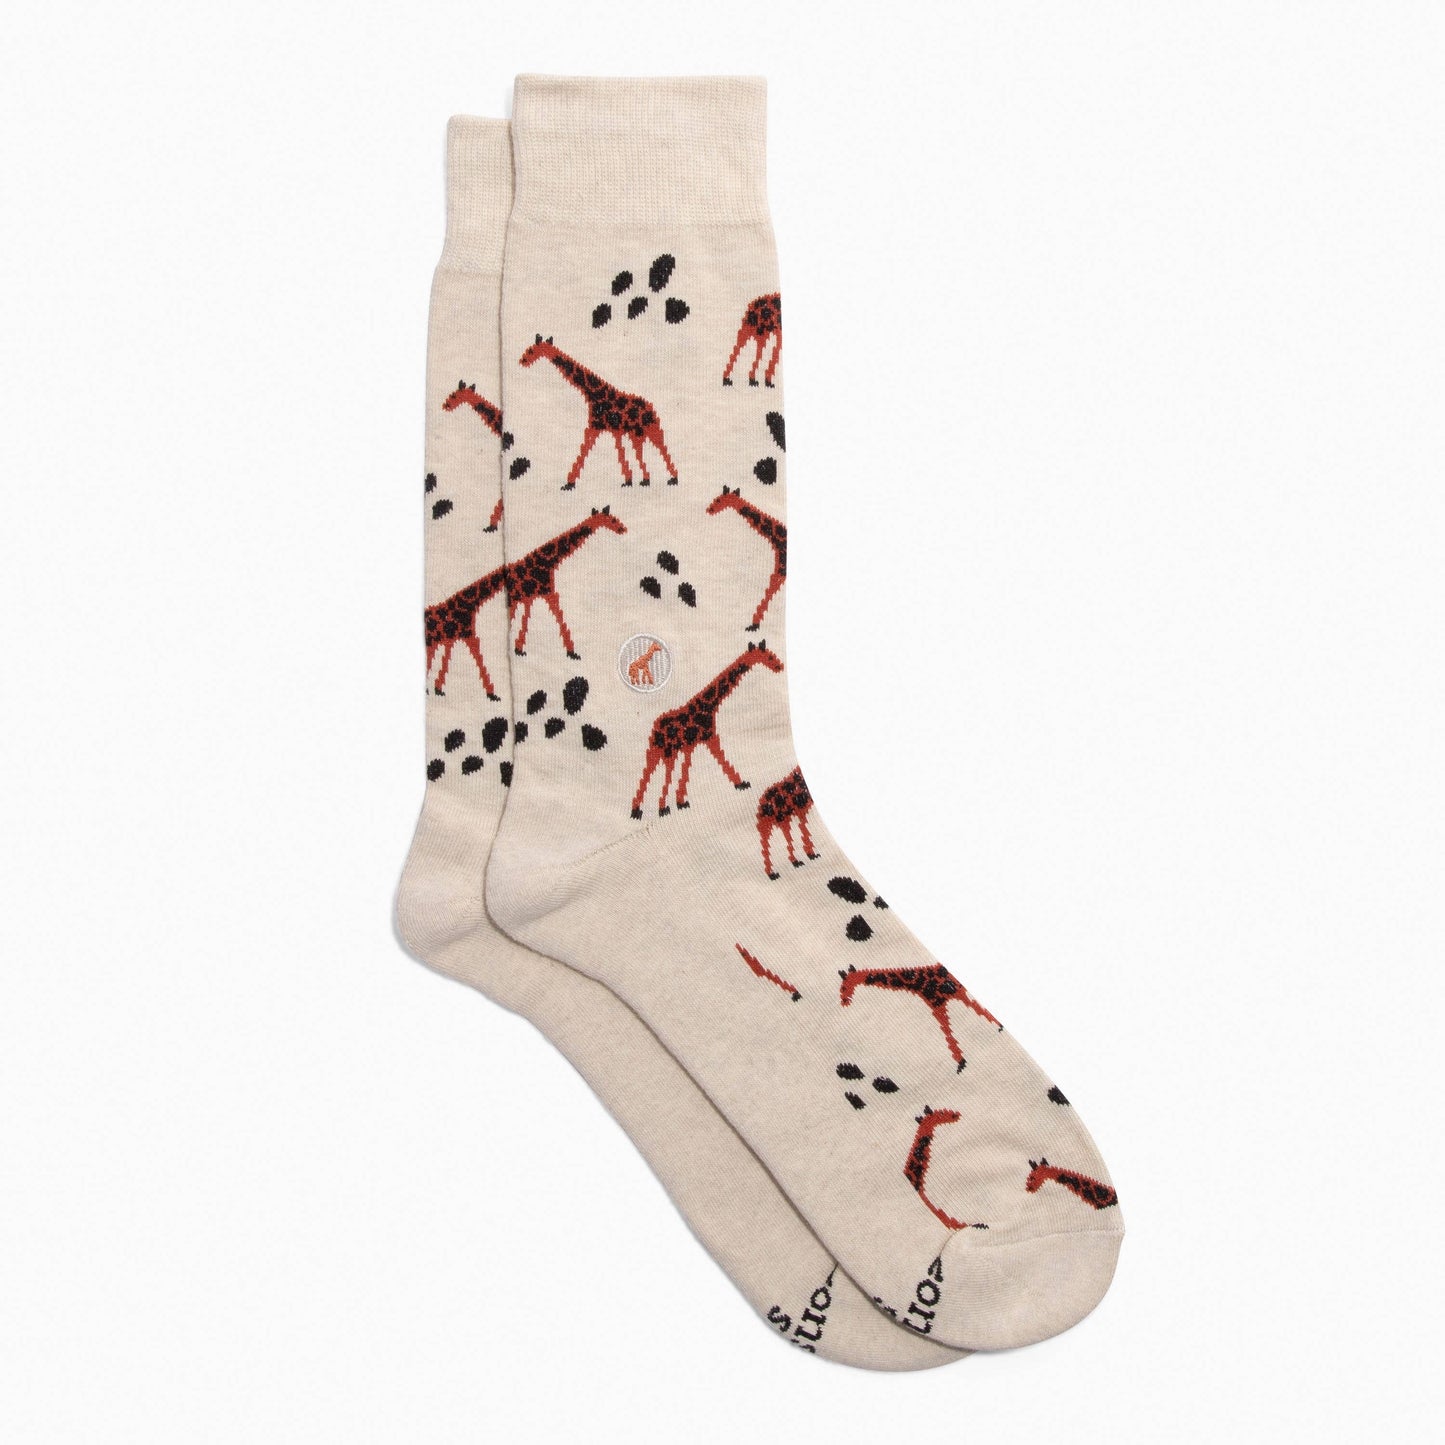 Conscious Step - Socks that Protect Giraffes  Conscious Step Small  -better made easy-eco-friendly-sustainable-gifting